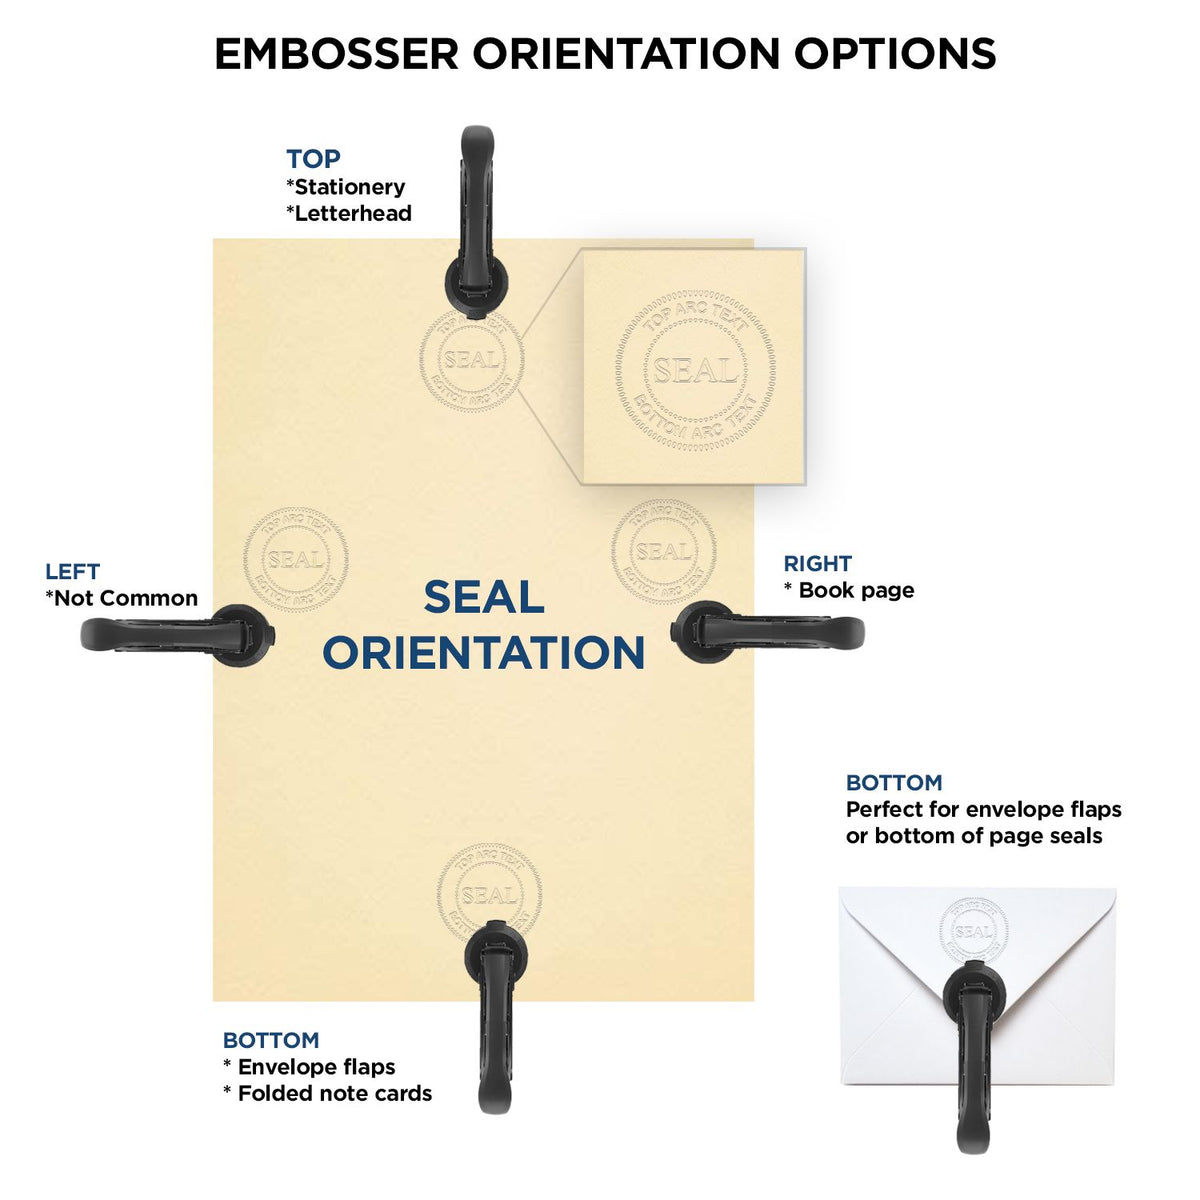 An infographic for the Heavy Duty Cast Iron Mississippi Land Surveyor Seal Embosser showing embosser orientation, this is showing examples of a top, bottom, right and left insert.